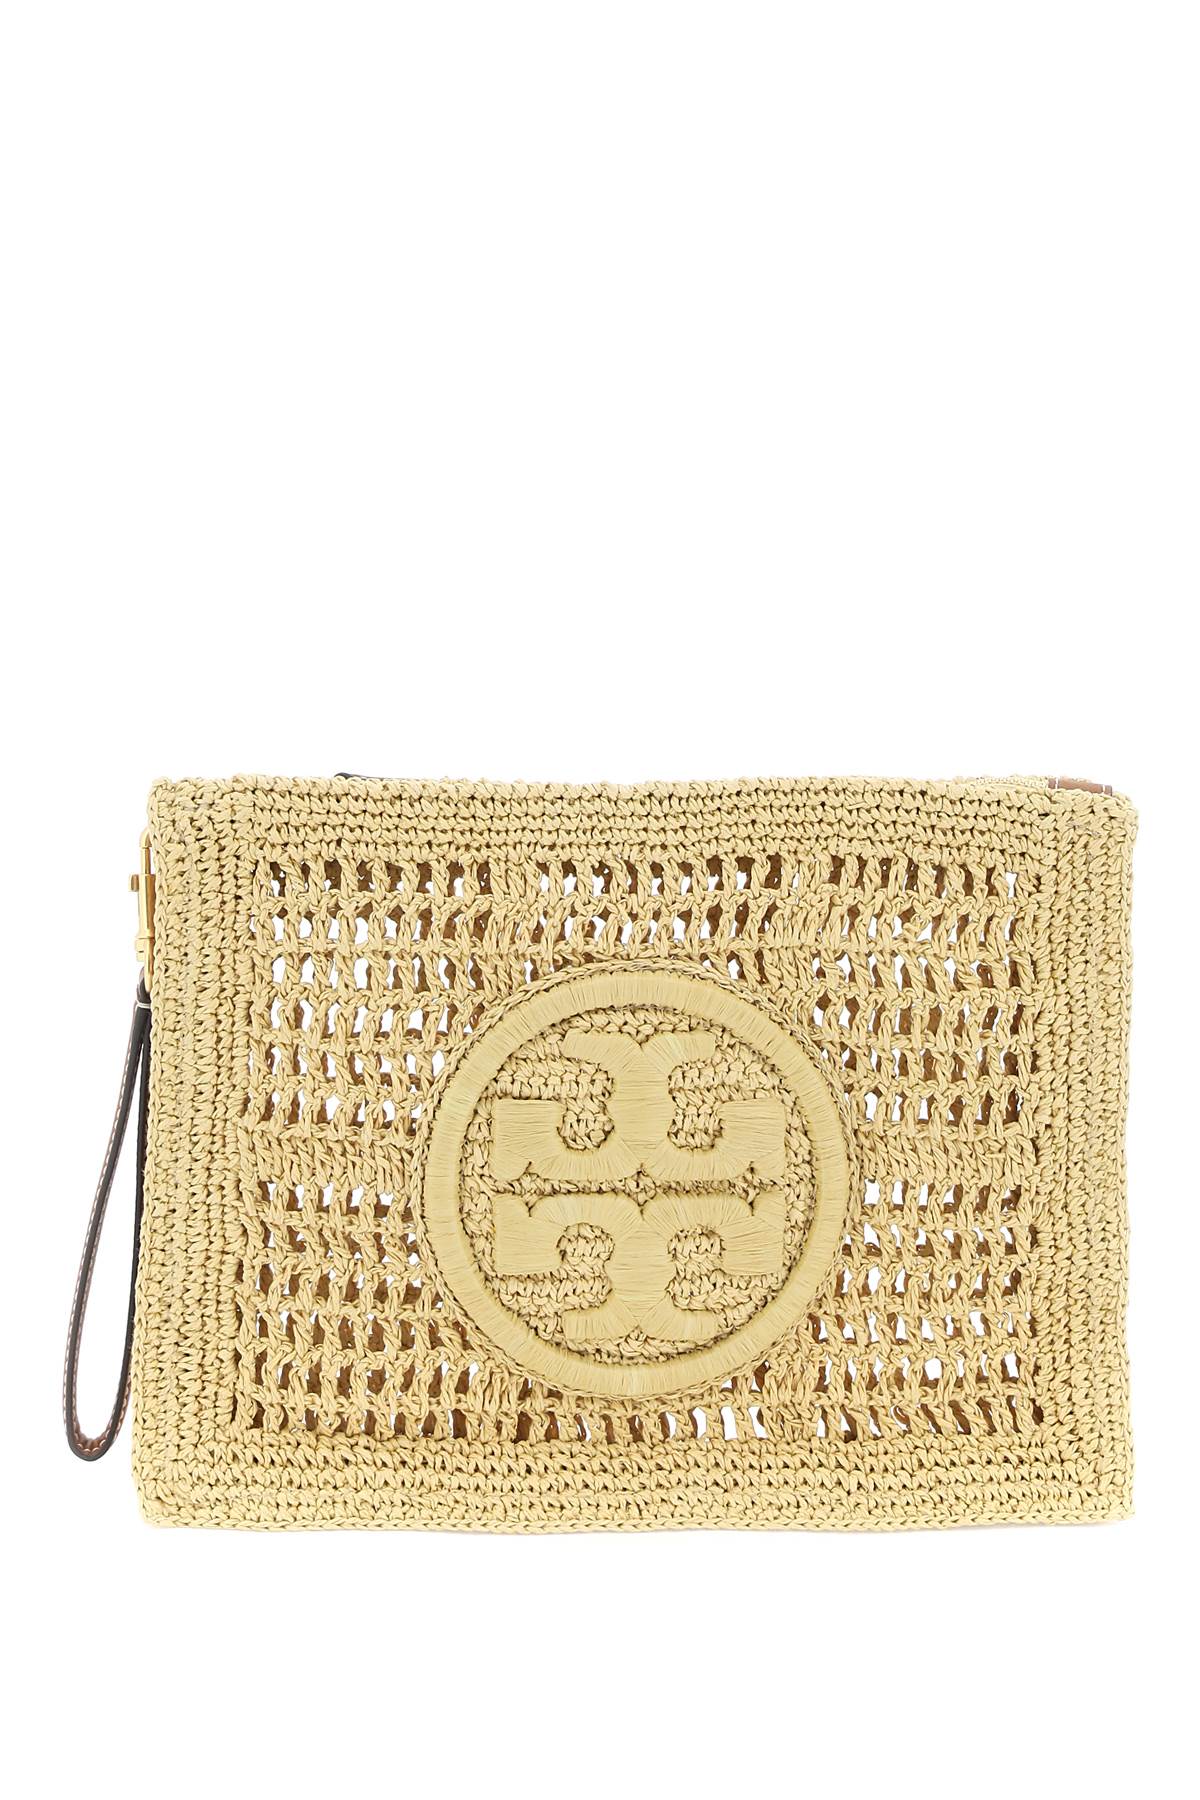 The Ella Raffia Pouch: A Stylish and Functional Clutch for Women